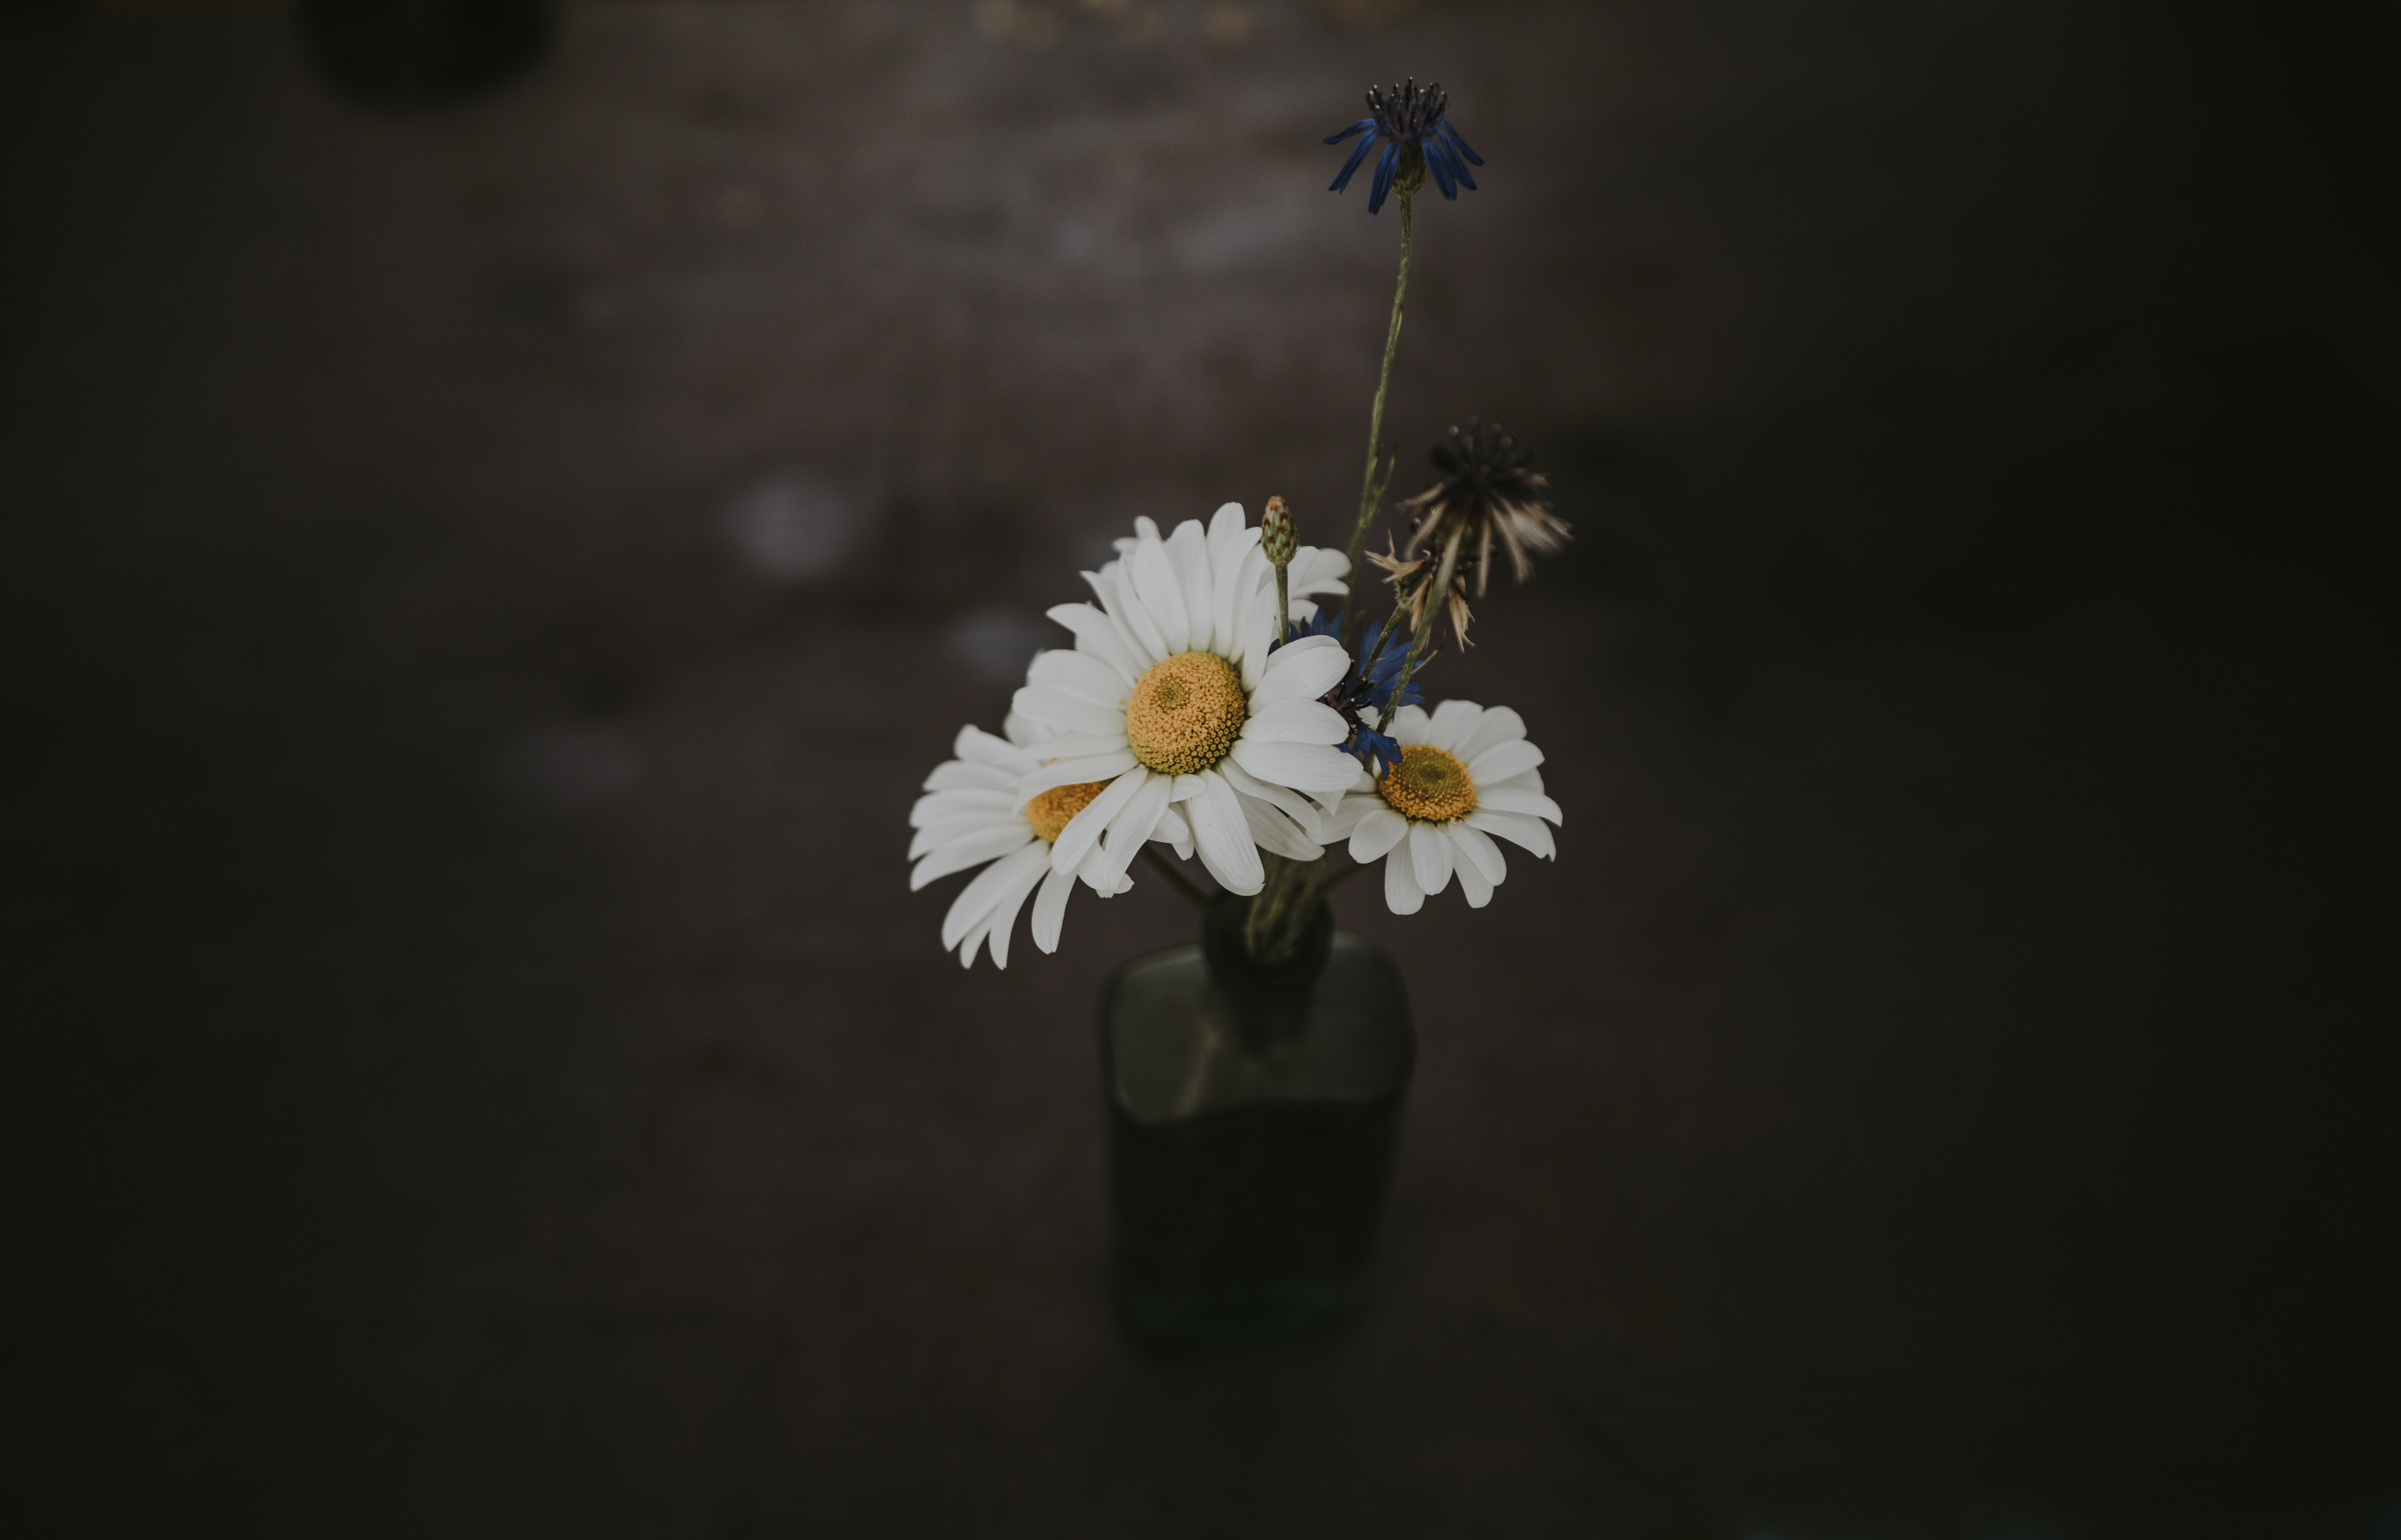 70897 Screensavers and Wallpapers Composition for phone. Download camomile, dark, bouquet, vase, composition, wildflowers pictures for free